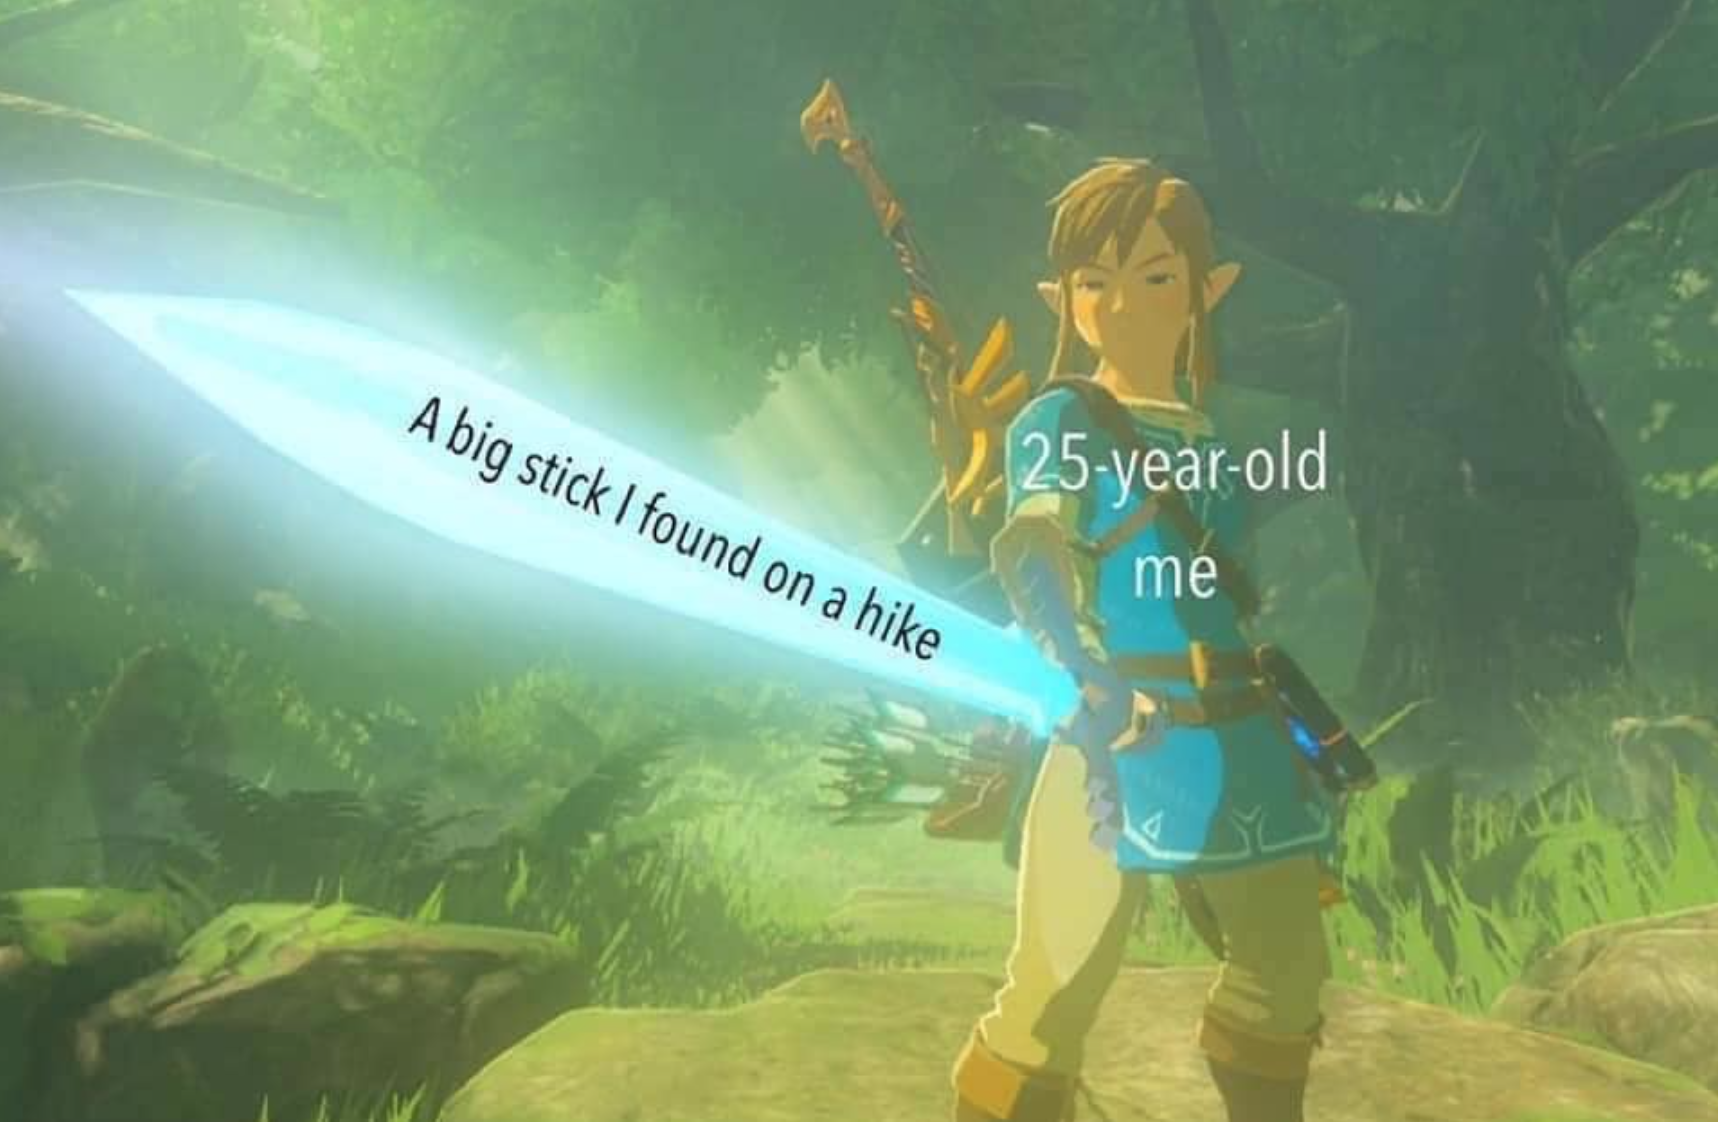 master sword memes - A big stick I found on a hike 25yearold me for